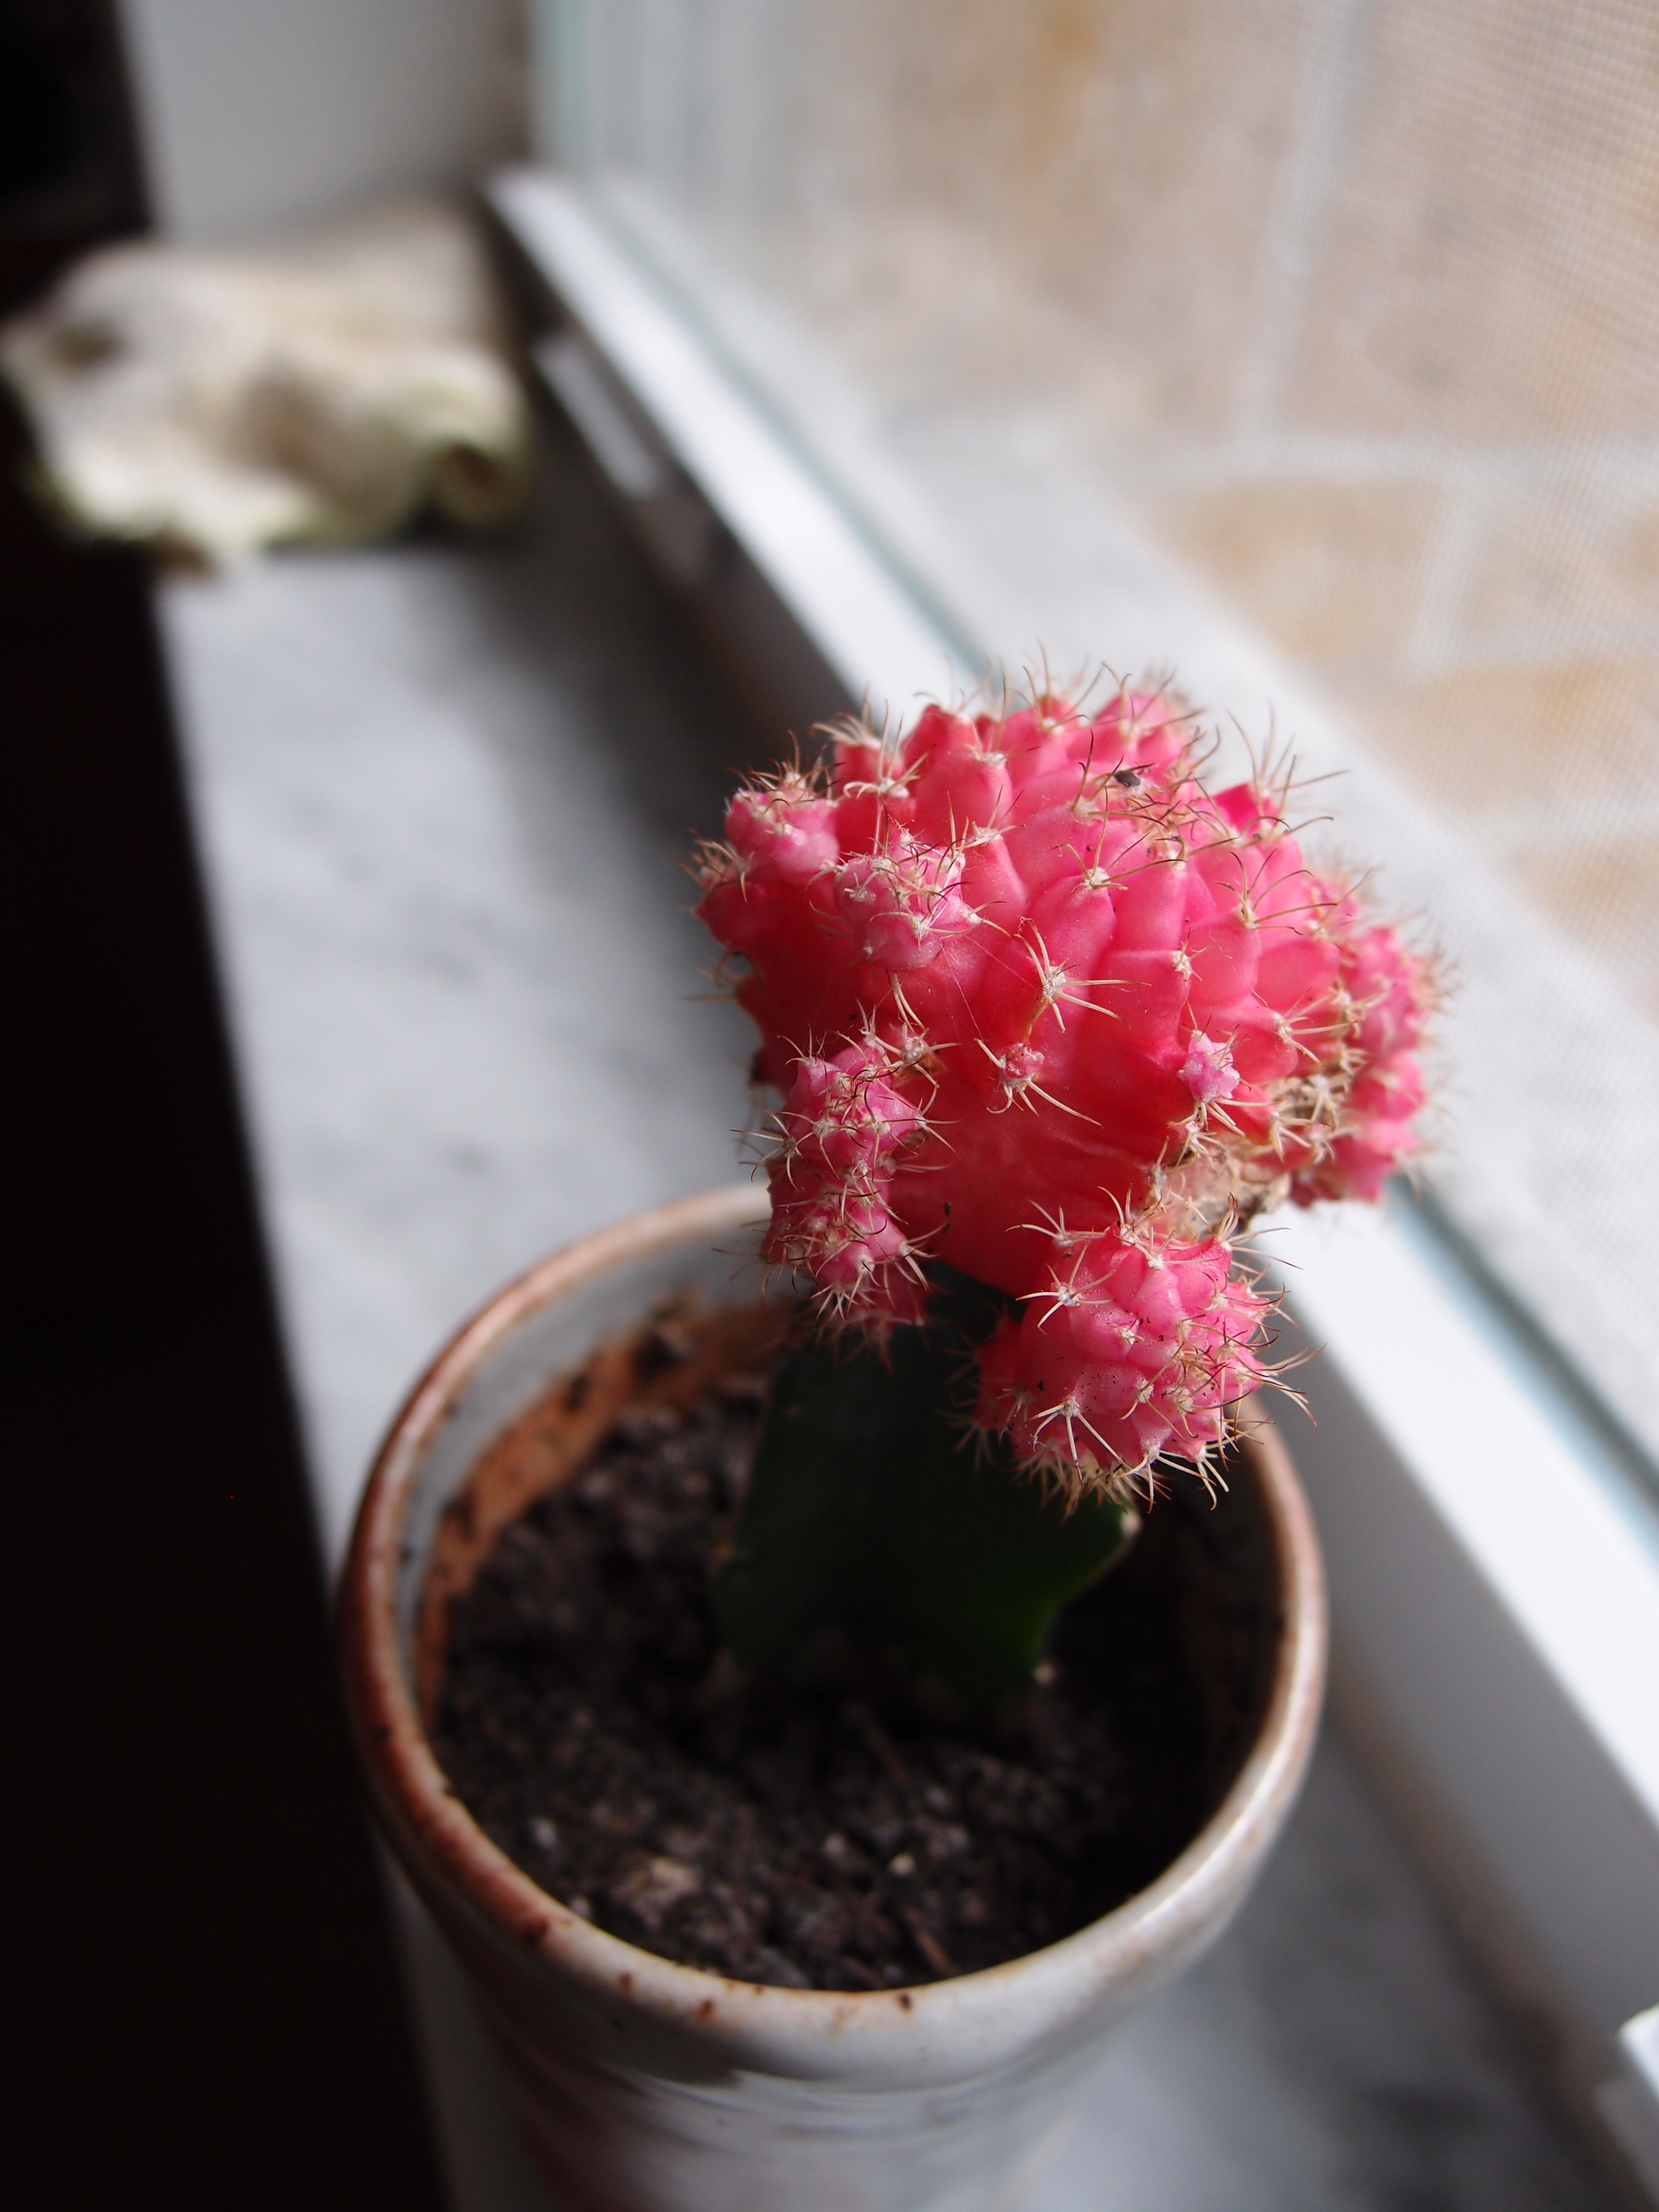 Plants in my Apartment – Grafted Cactus – Experiment No. 1